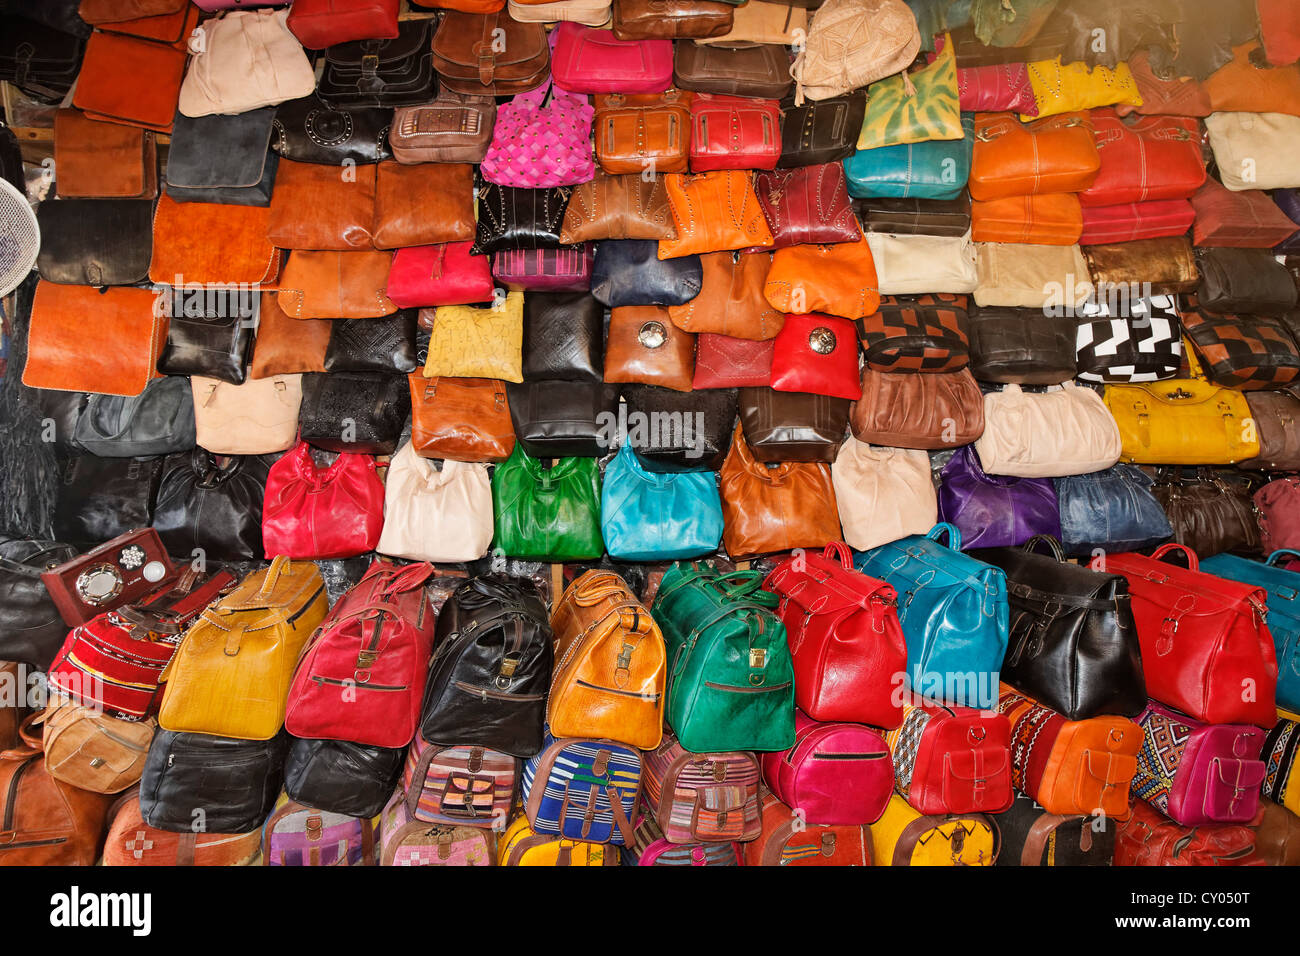 Colourful leather bags and handbags, Fès, Fez, Fès-Boulemane, Morocco, North Africa, Maghreb, Africa Stock Photo